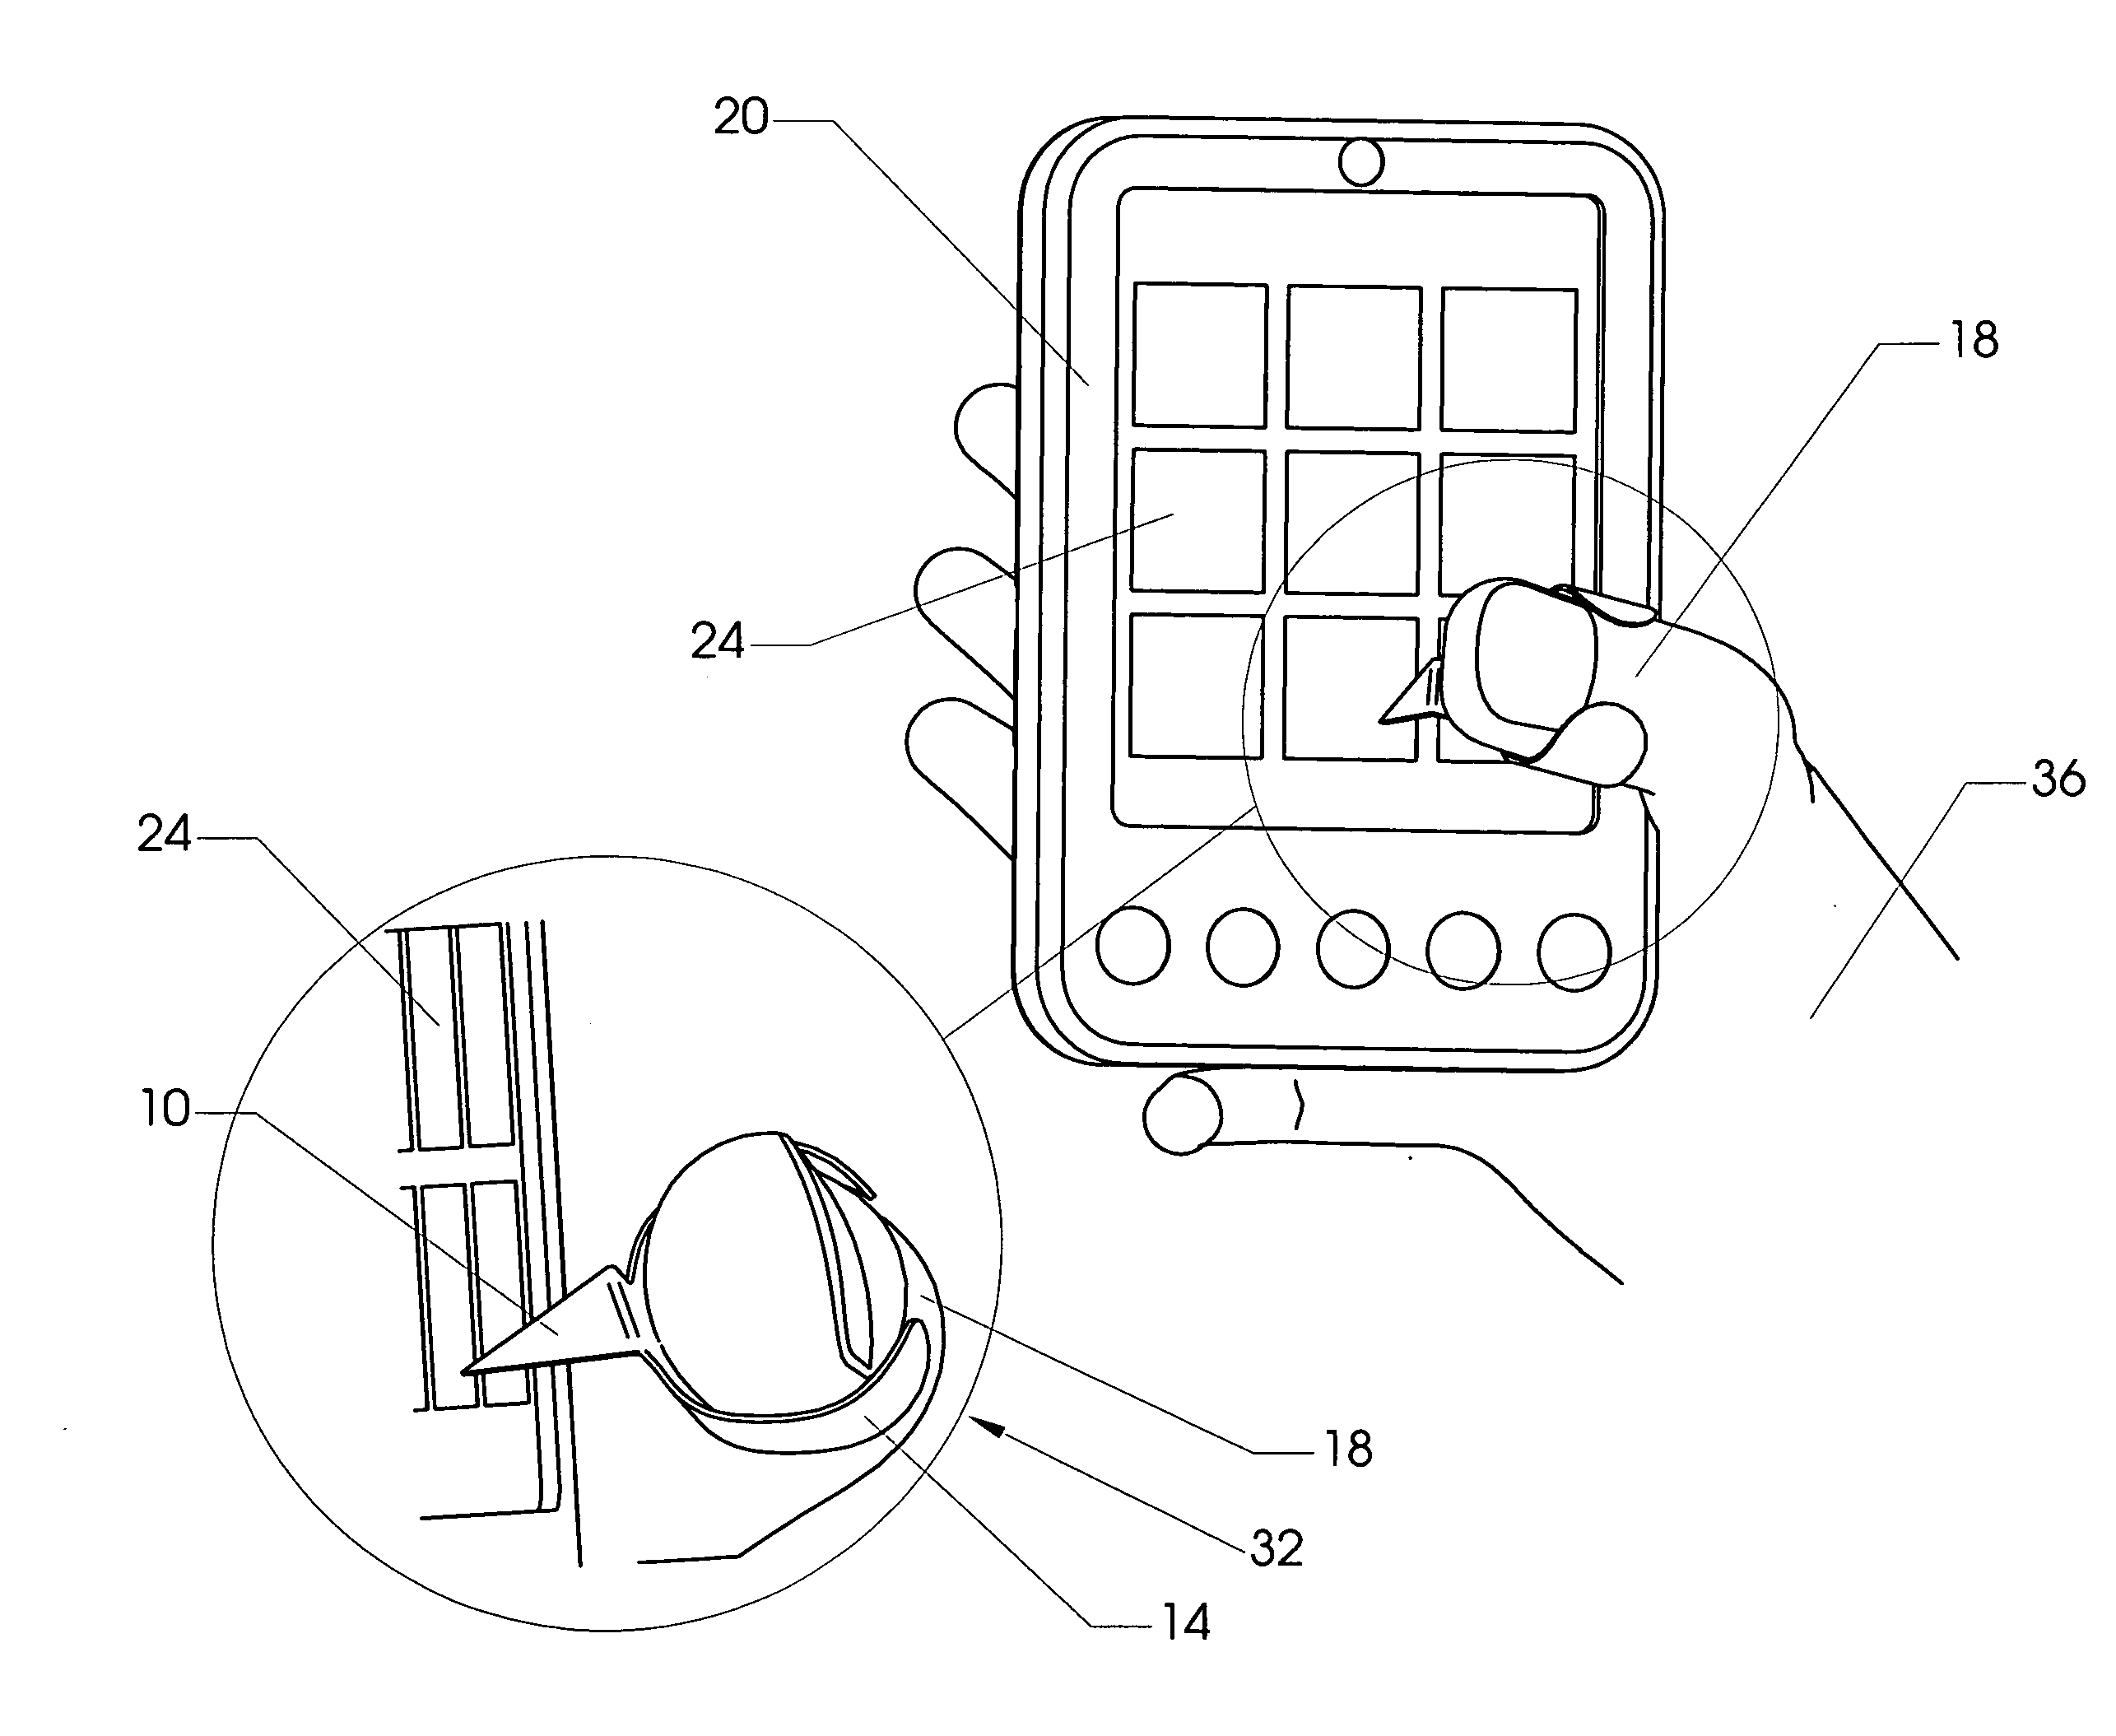 Stylus for a touch-screen device